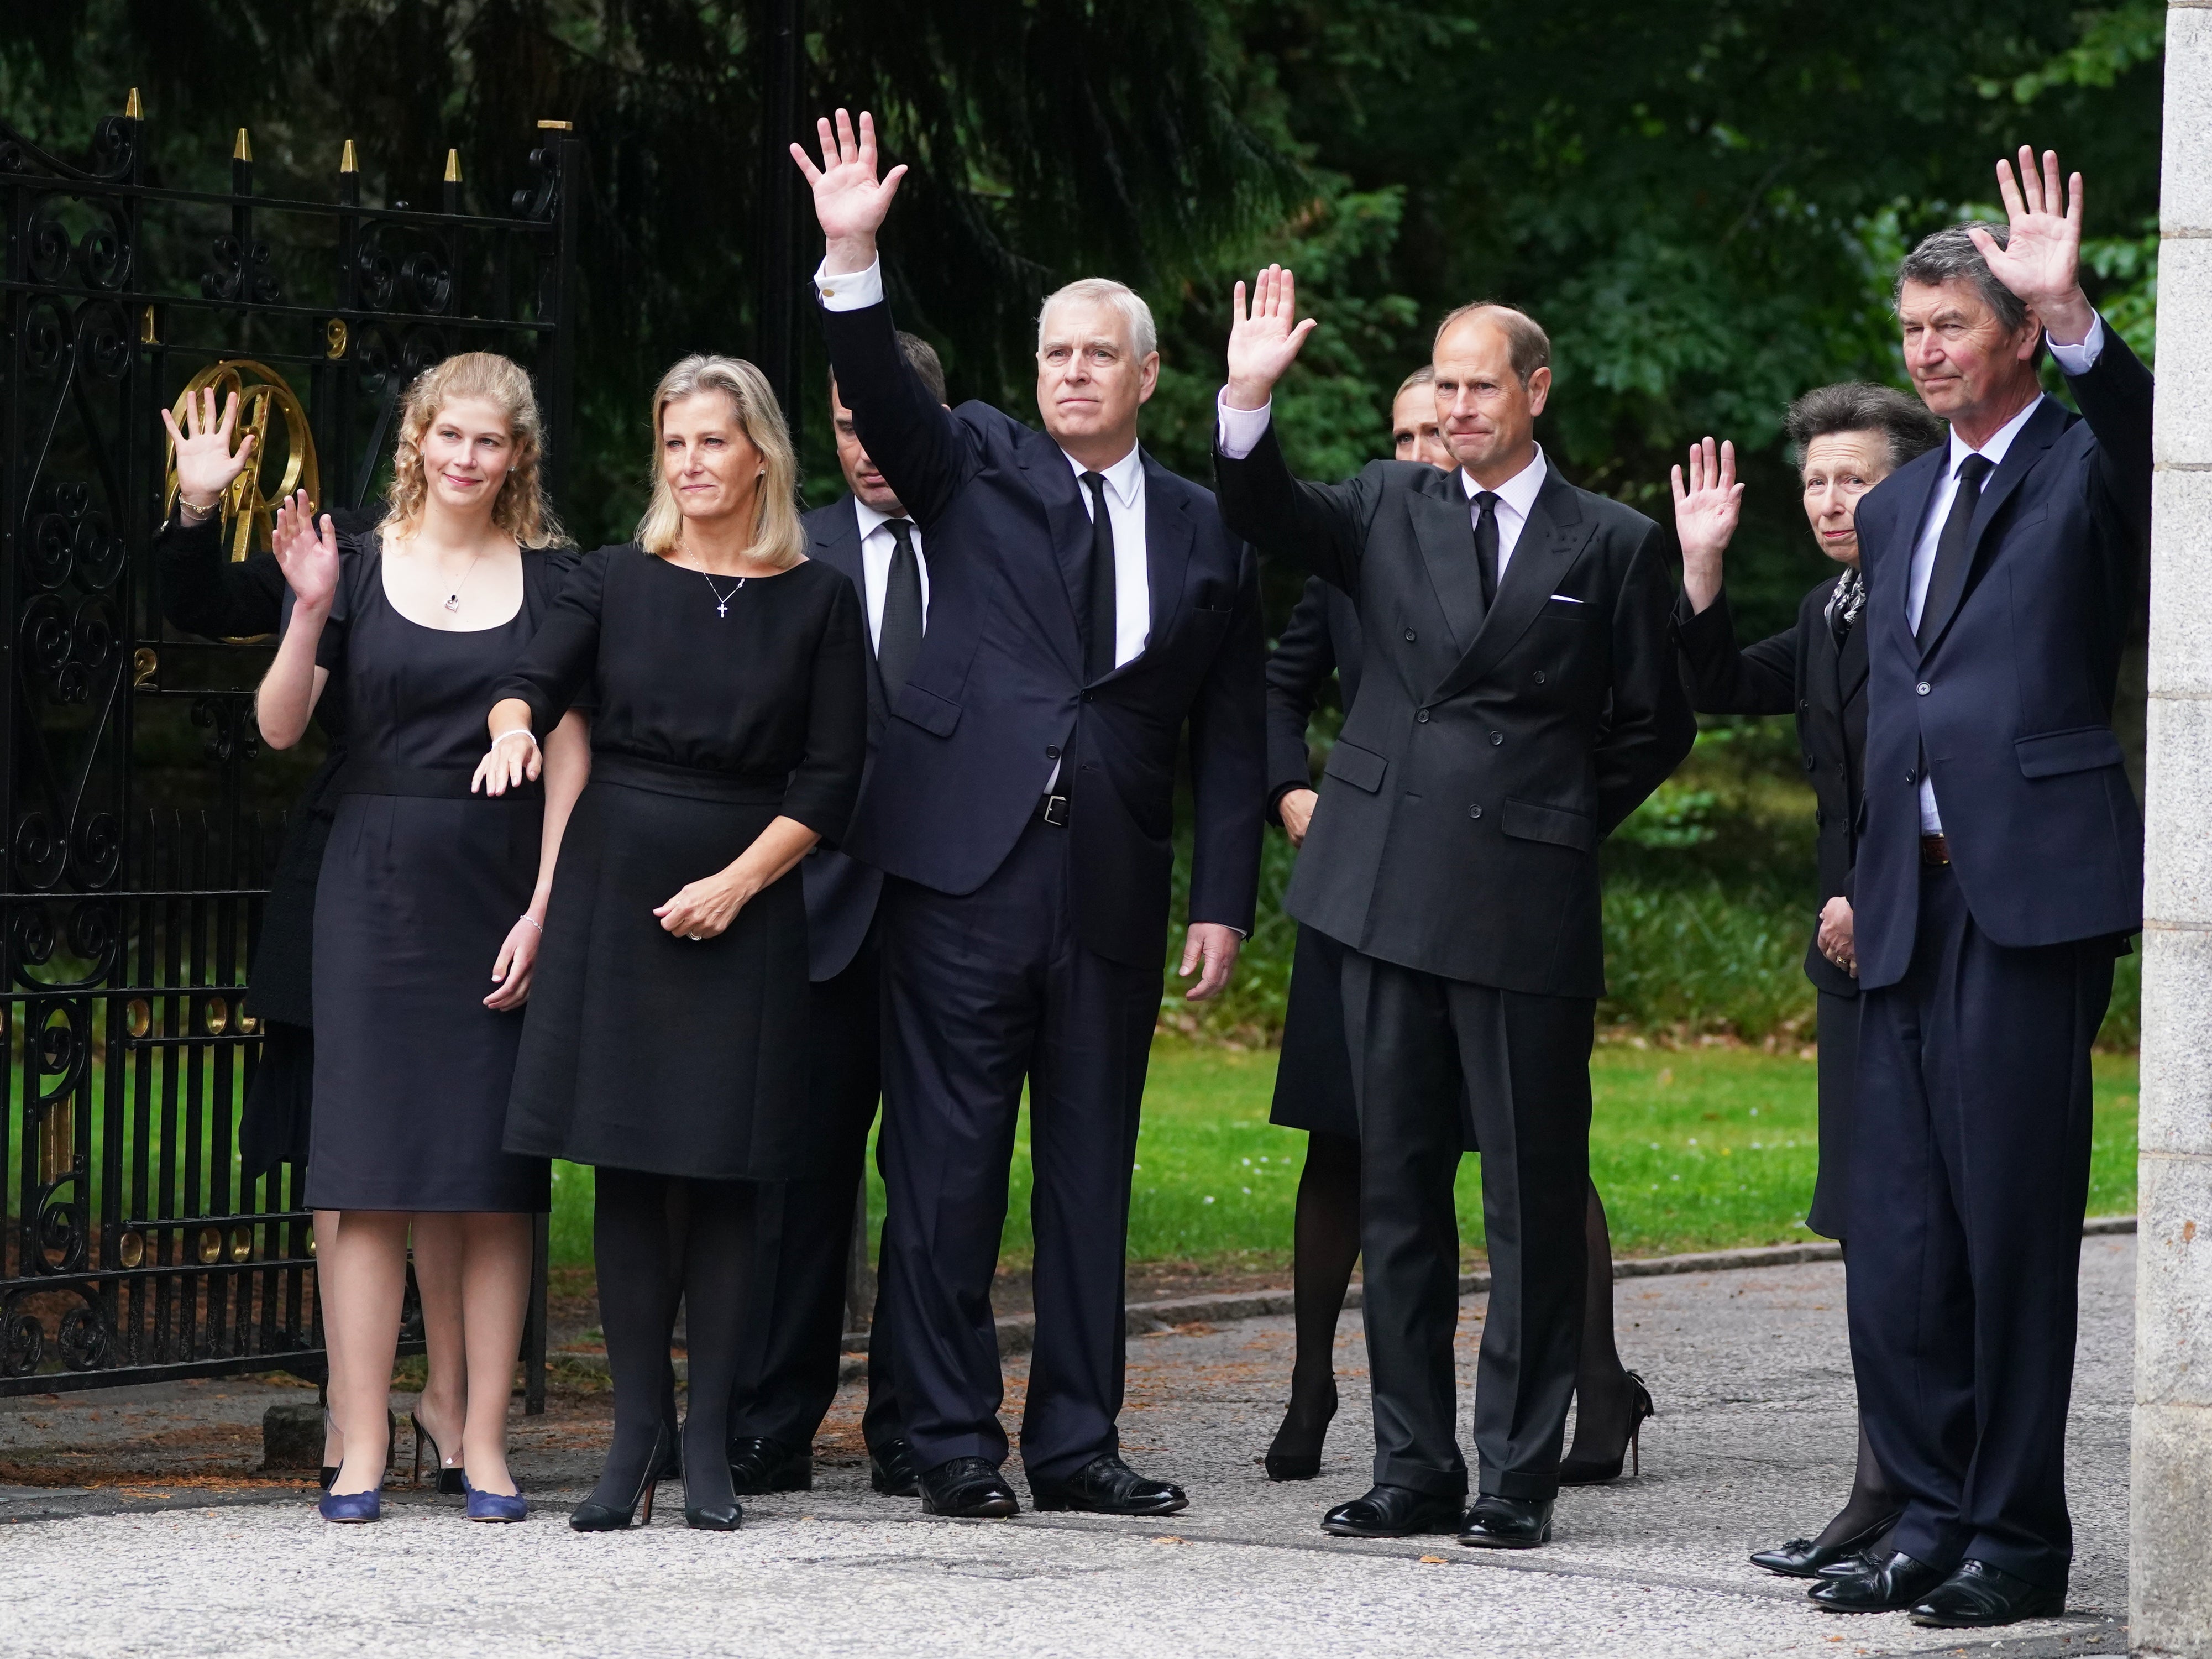 (Left-right) Lady Louise Windsor, the Countess of Wessex, Peter Phillips (hidden), the Duke of York, Zara Tindall (hidden), the Earl of Wessex, the Princess Royal and Vice Admiral Timothy Laurence wave to well-wishers outside Balmoral